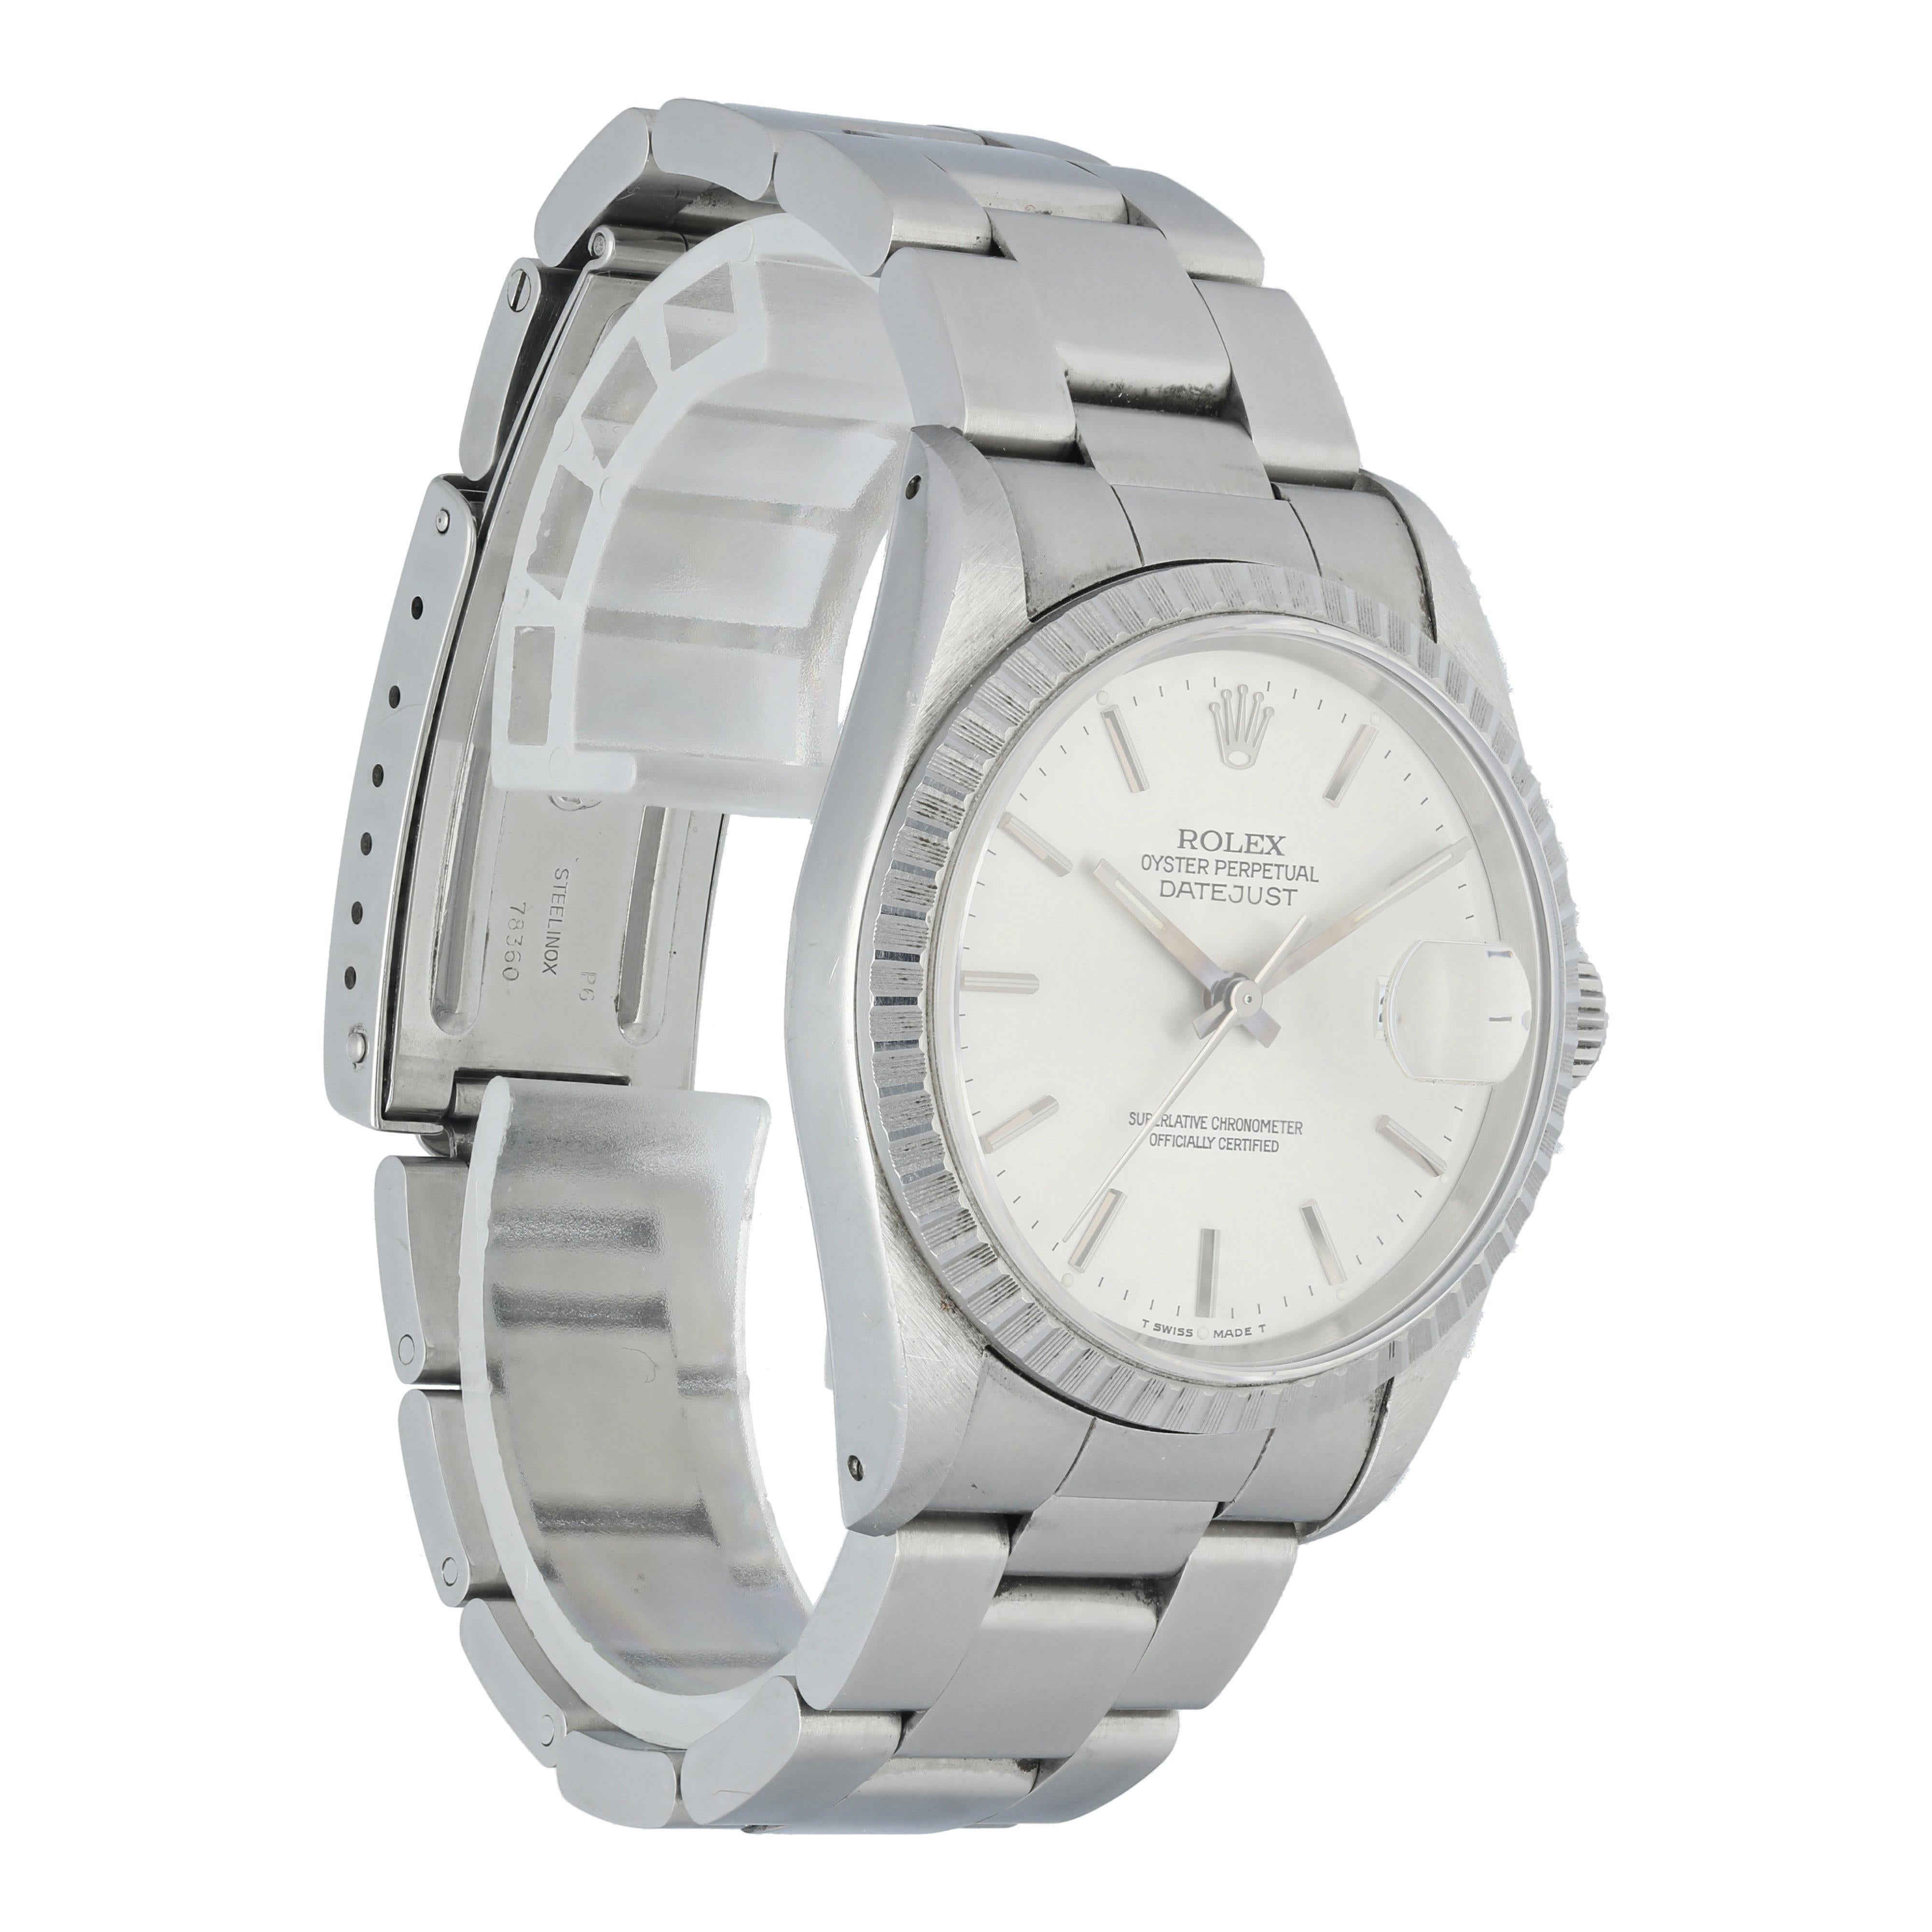 Rolex Datejust 16220 Men's Watch In Excellent Condition For Sale In New York, NY